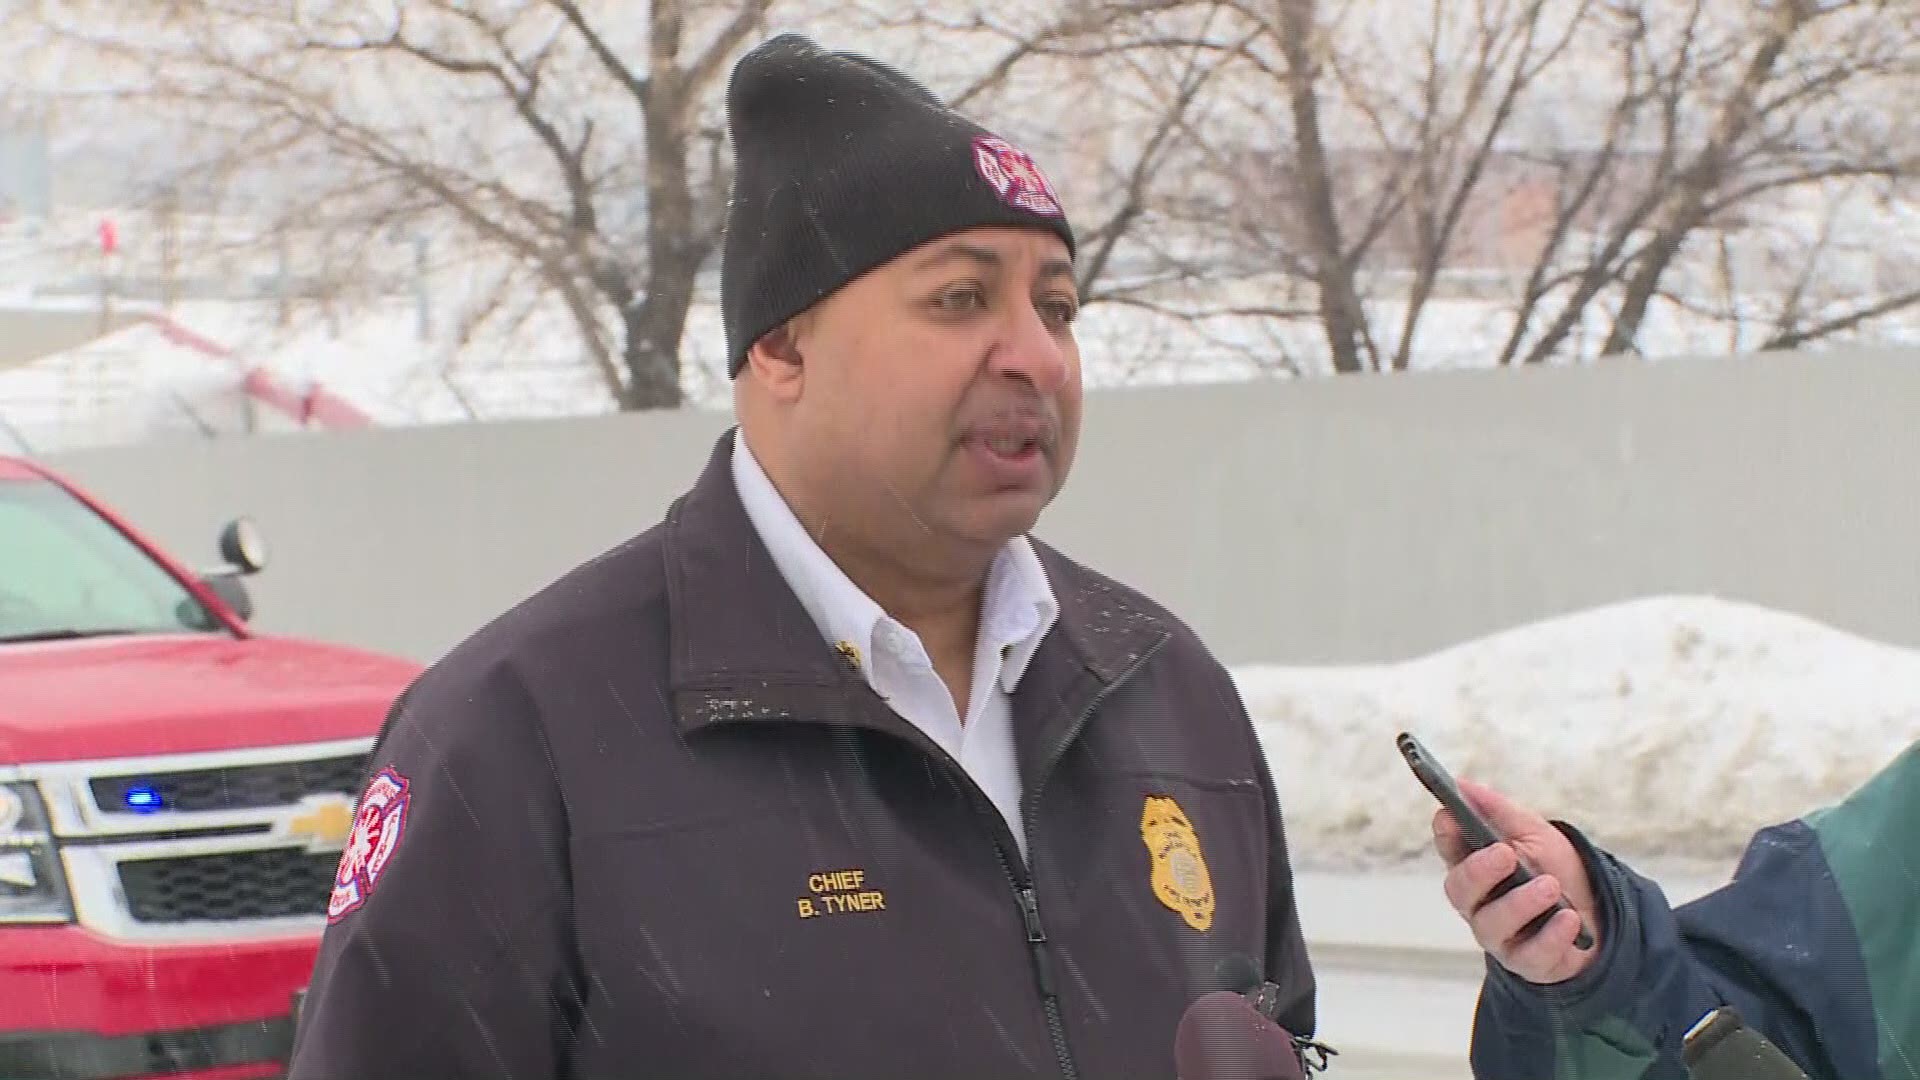 Minneapolis Fire Asst. Chief Bryan Tyner says about 600-700 gallons of the 5,700 gallons that spilled made its way out of the containment system in the facility and into the city’s storm drains.